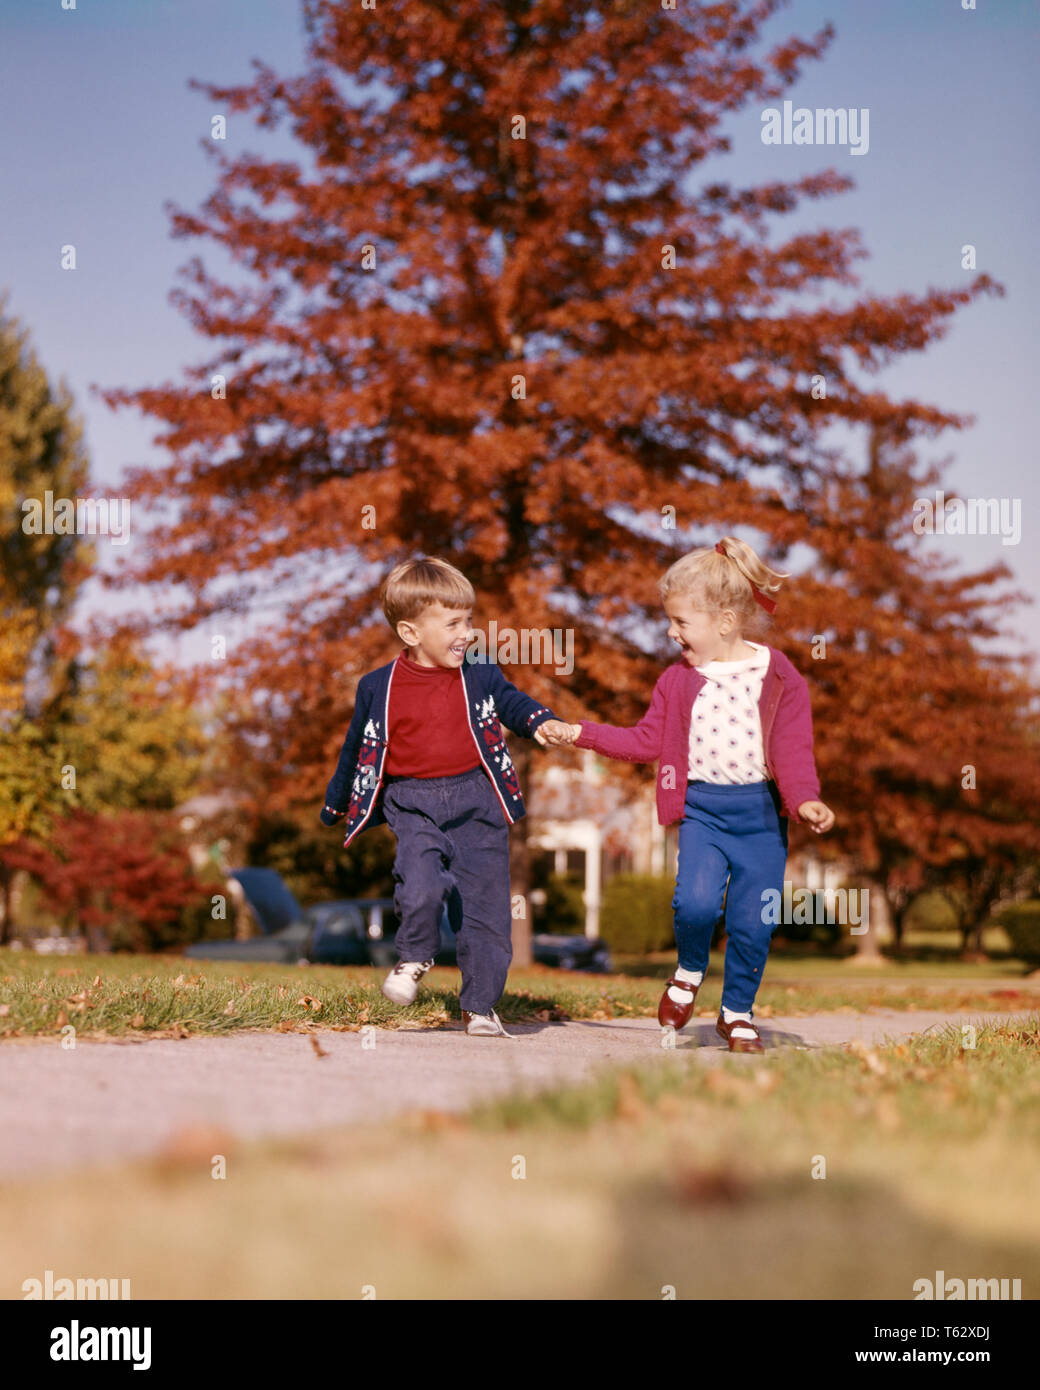 1960s SMILING BOY AND GIRL RUNNING SKIPPING HOLDING HANDS ON SIDEWALK AUTUMN  - kj3562 HAR001 HARS BROTHERS HEALTHINESS HOME LIFE NATURE COPY SPACE FRIENDSHIP FULL-LENGTH MALES SIBLINGS SISTERS HAPPINESS ADVENTURE AND LOW ANGLE RECREATION SKIPPING FALL SEASON HOLDING HANDS SIBLING CONNECTION ESCAPE FRIENDLY STYLISH JUVENILES MARY JANE SHOES TOGETHERNESS AUTUMNAL CAUCASIAN ETHNICITY FALL FOLIAGE HAR001 OLD FASHIONED Stock Photo